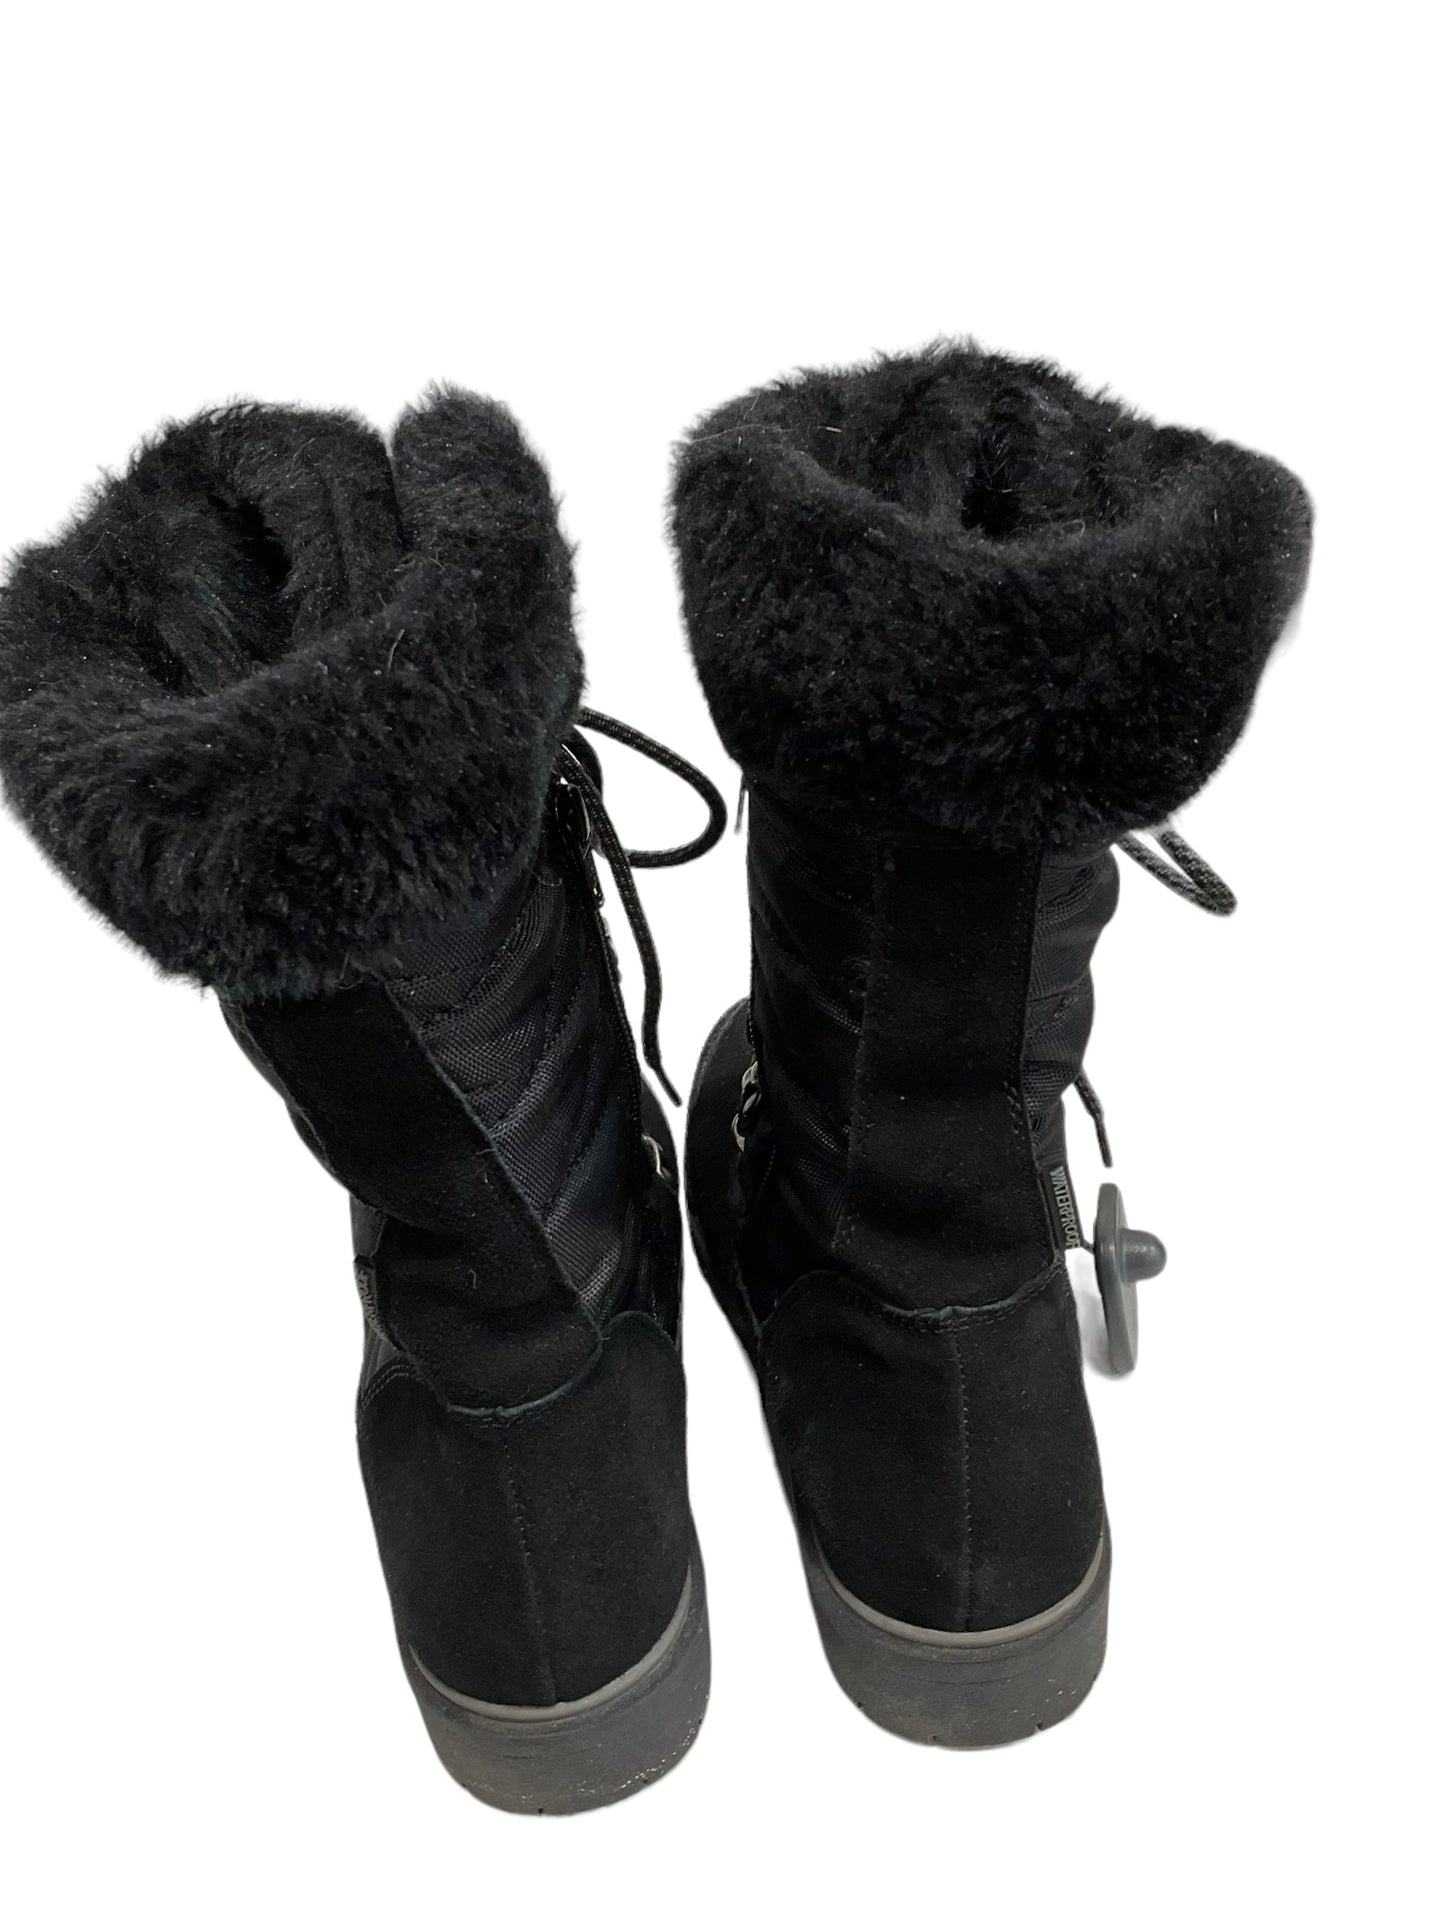 Boots Snow By Bare Traps  Size: 7.5